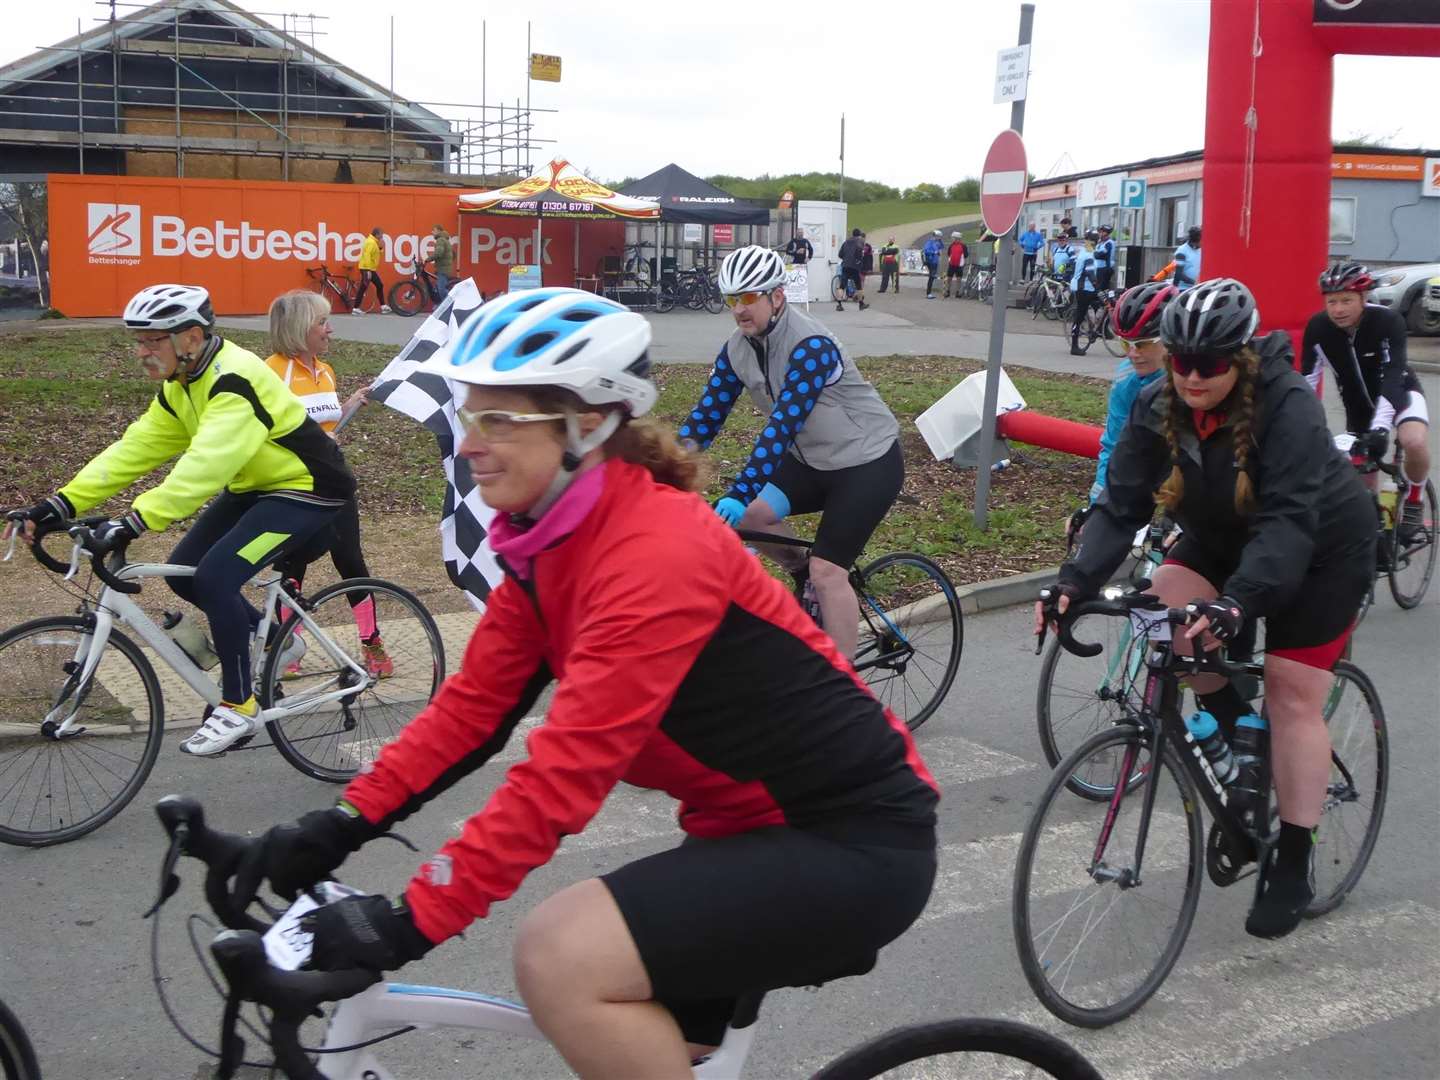 Cyclists taking part in the 2018 KM Big Bike Ride (6951555)